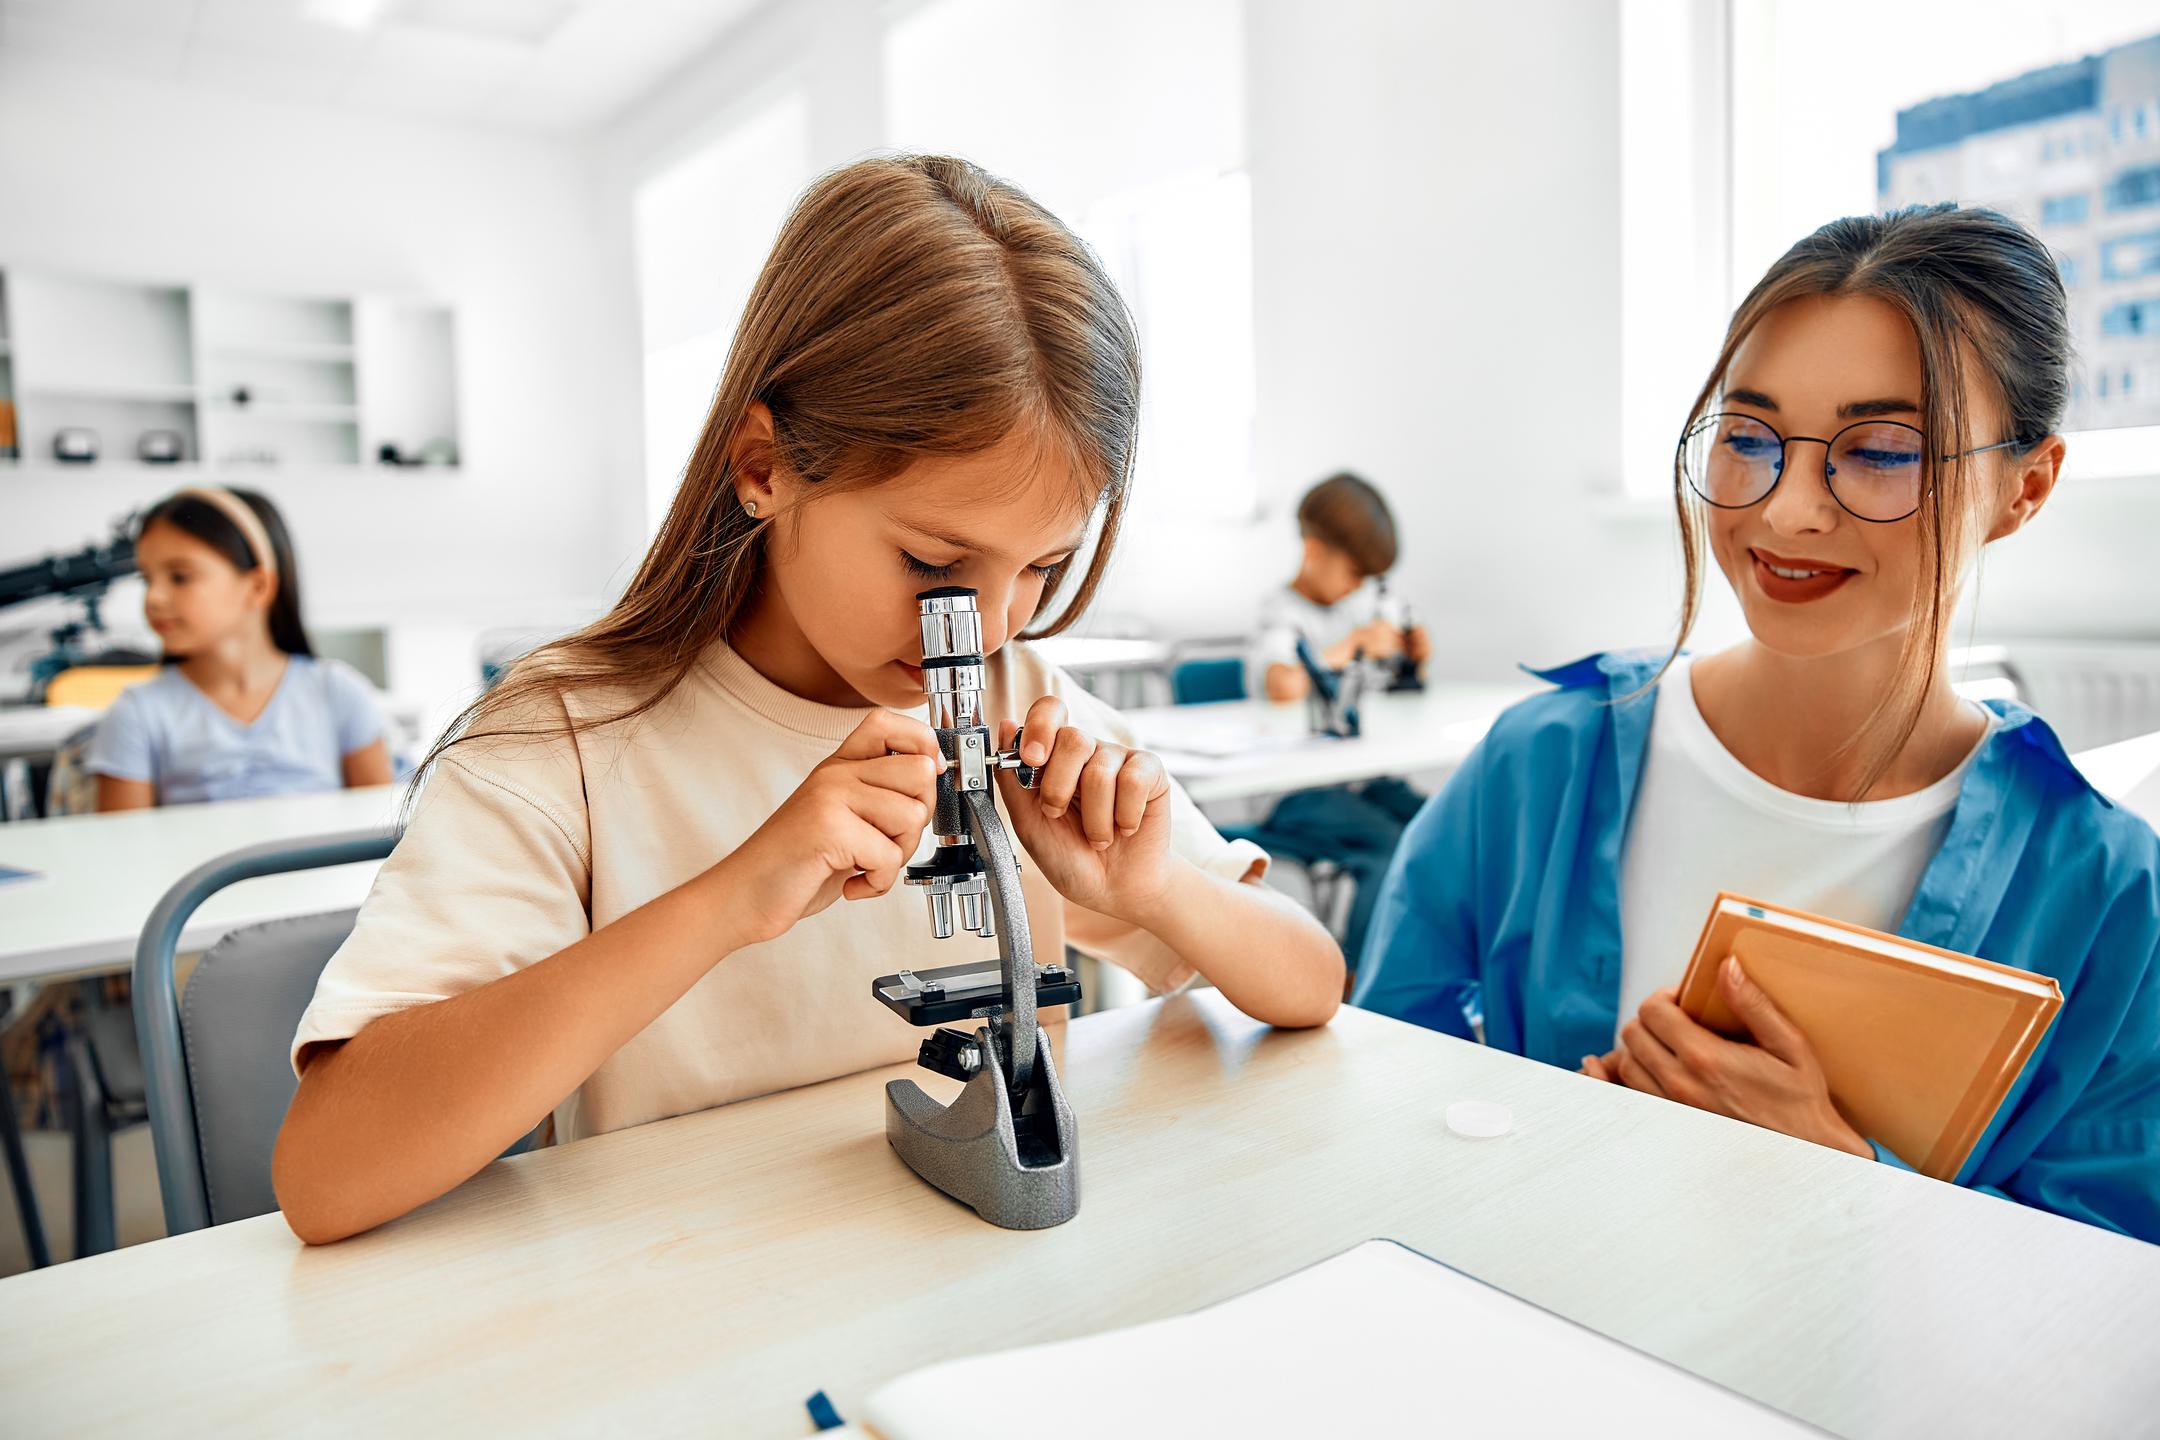 A girl using a microscope for scientific exploration, demonstrating curiosity and engagement in a learning environment.